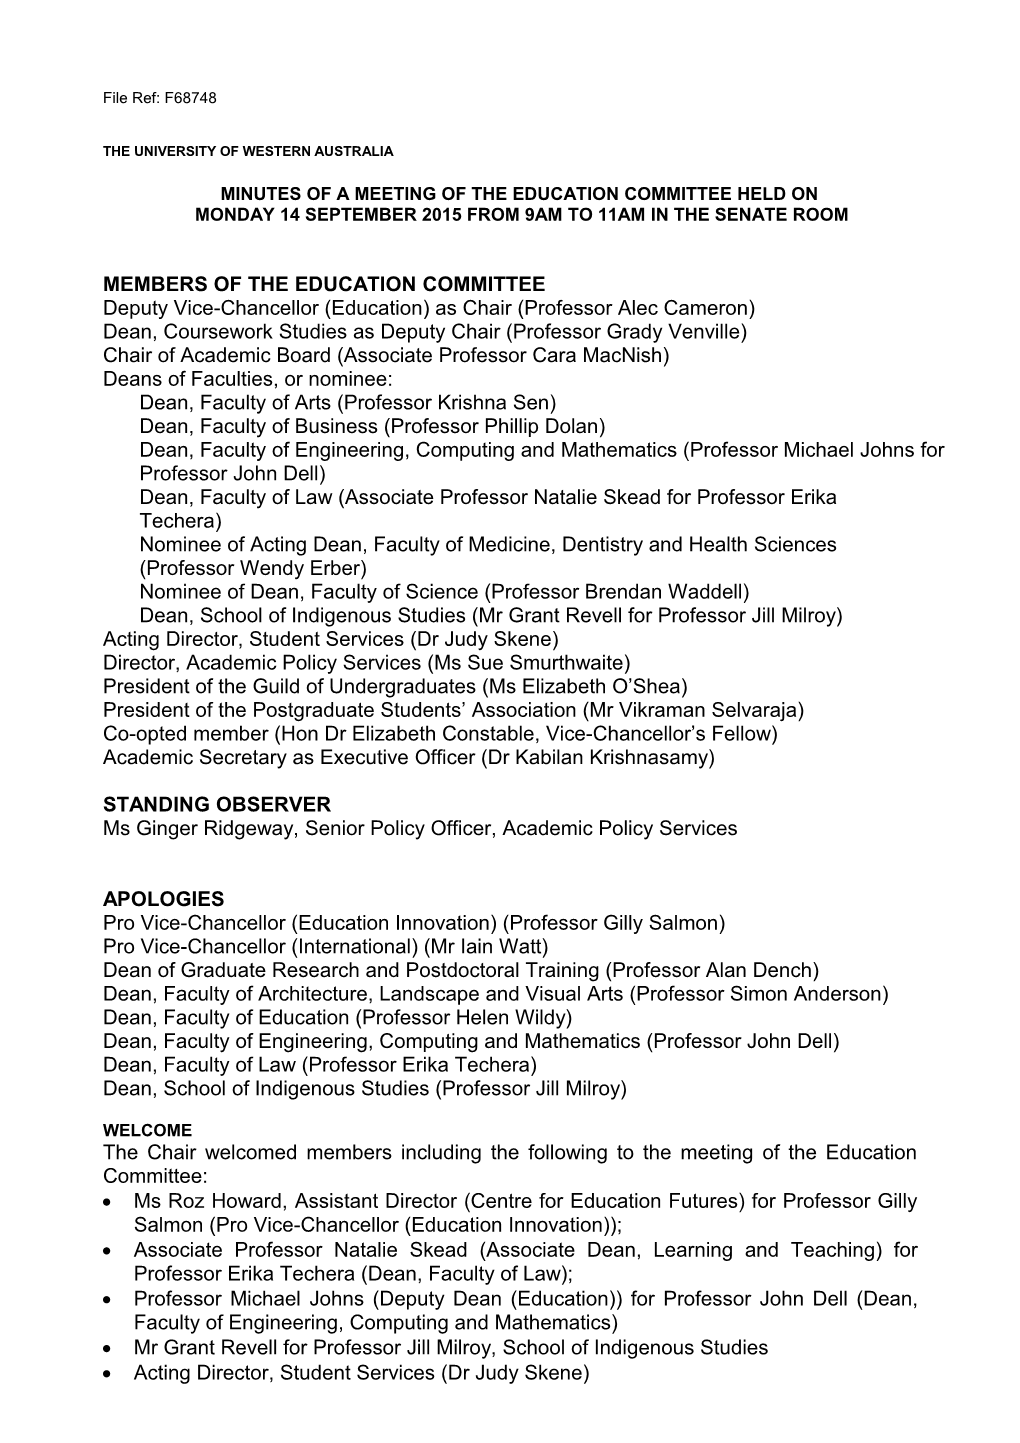 Minutes of a Meeting of the Education Committee Held On